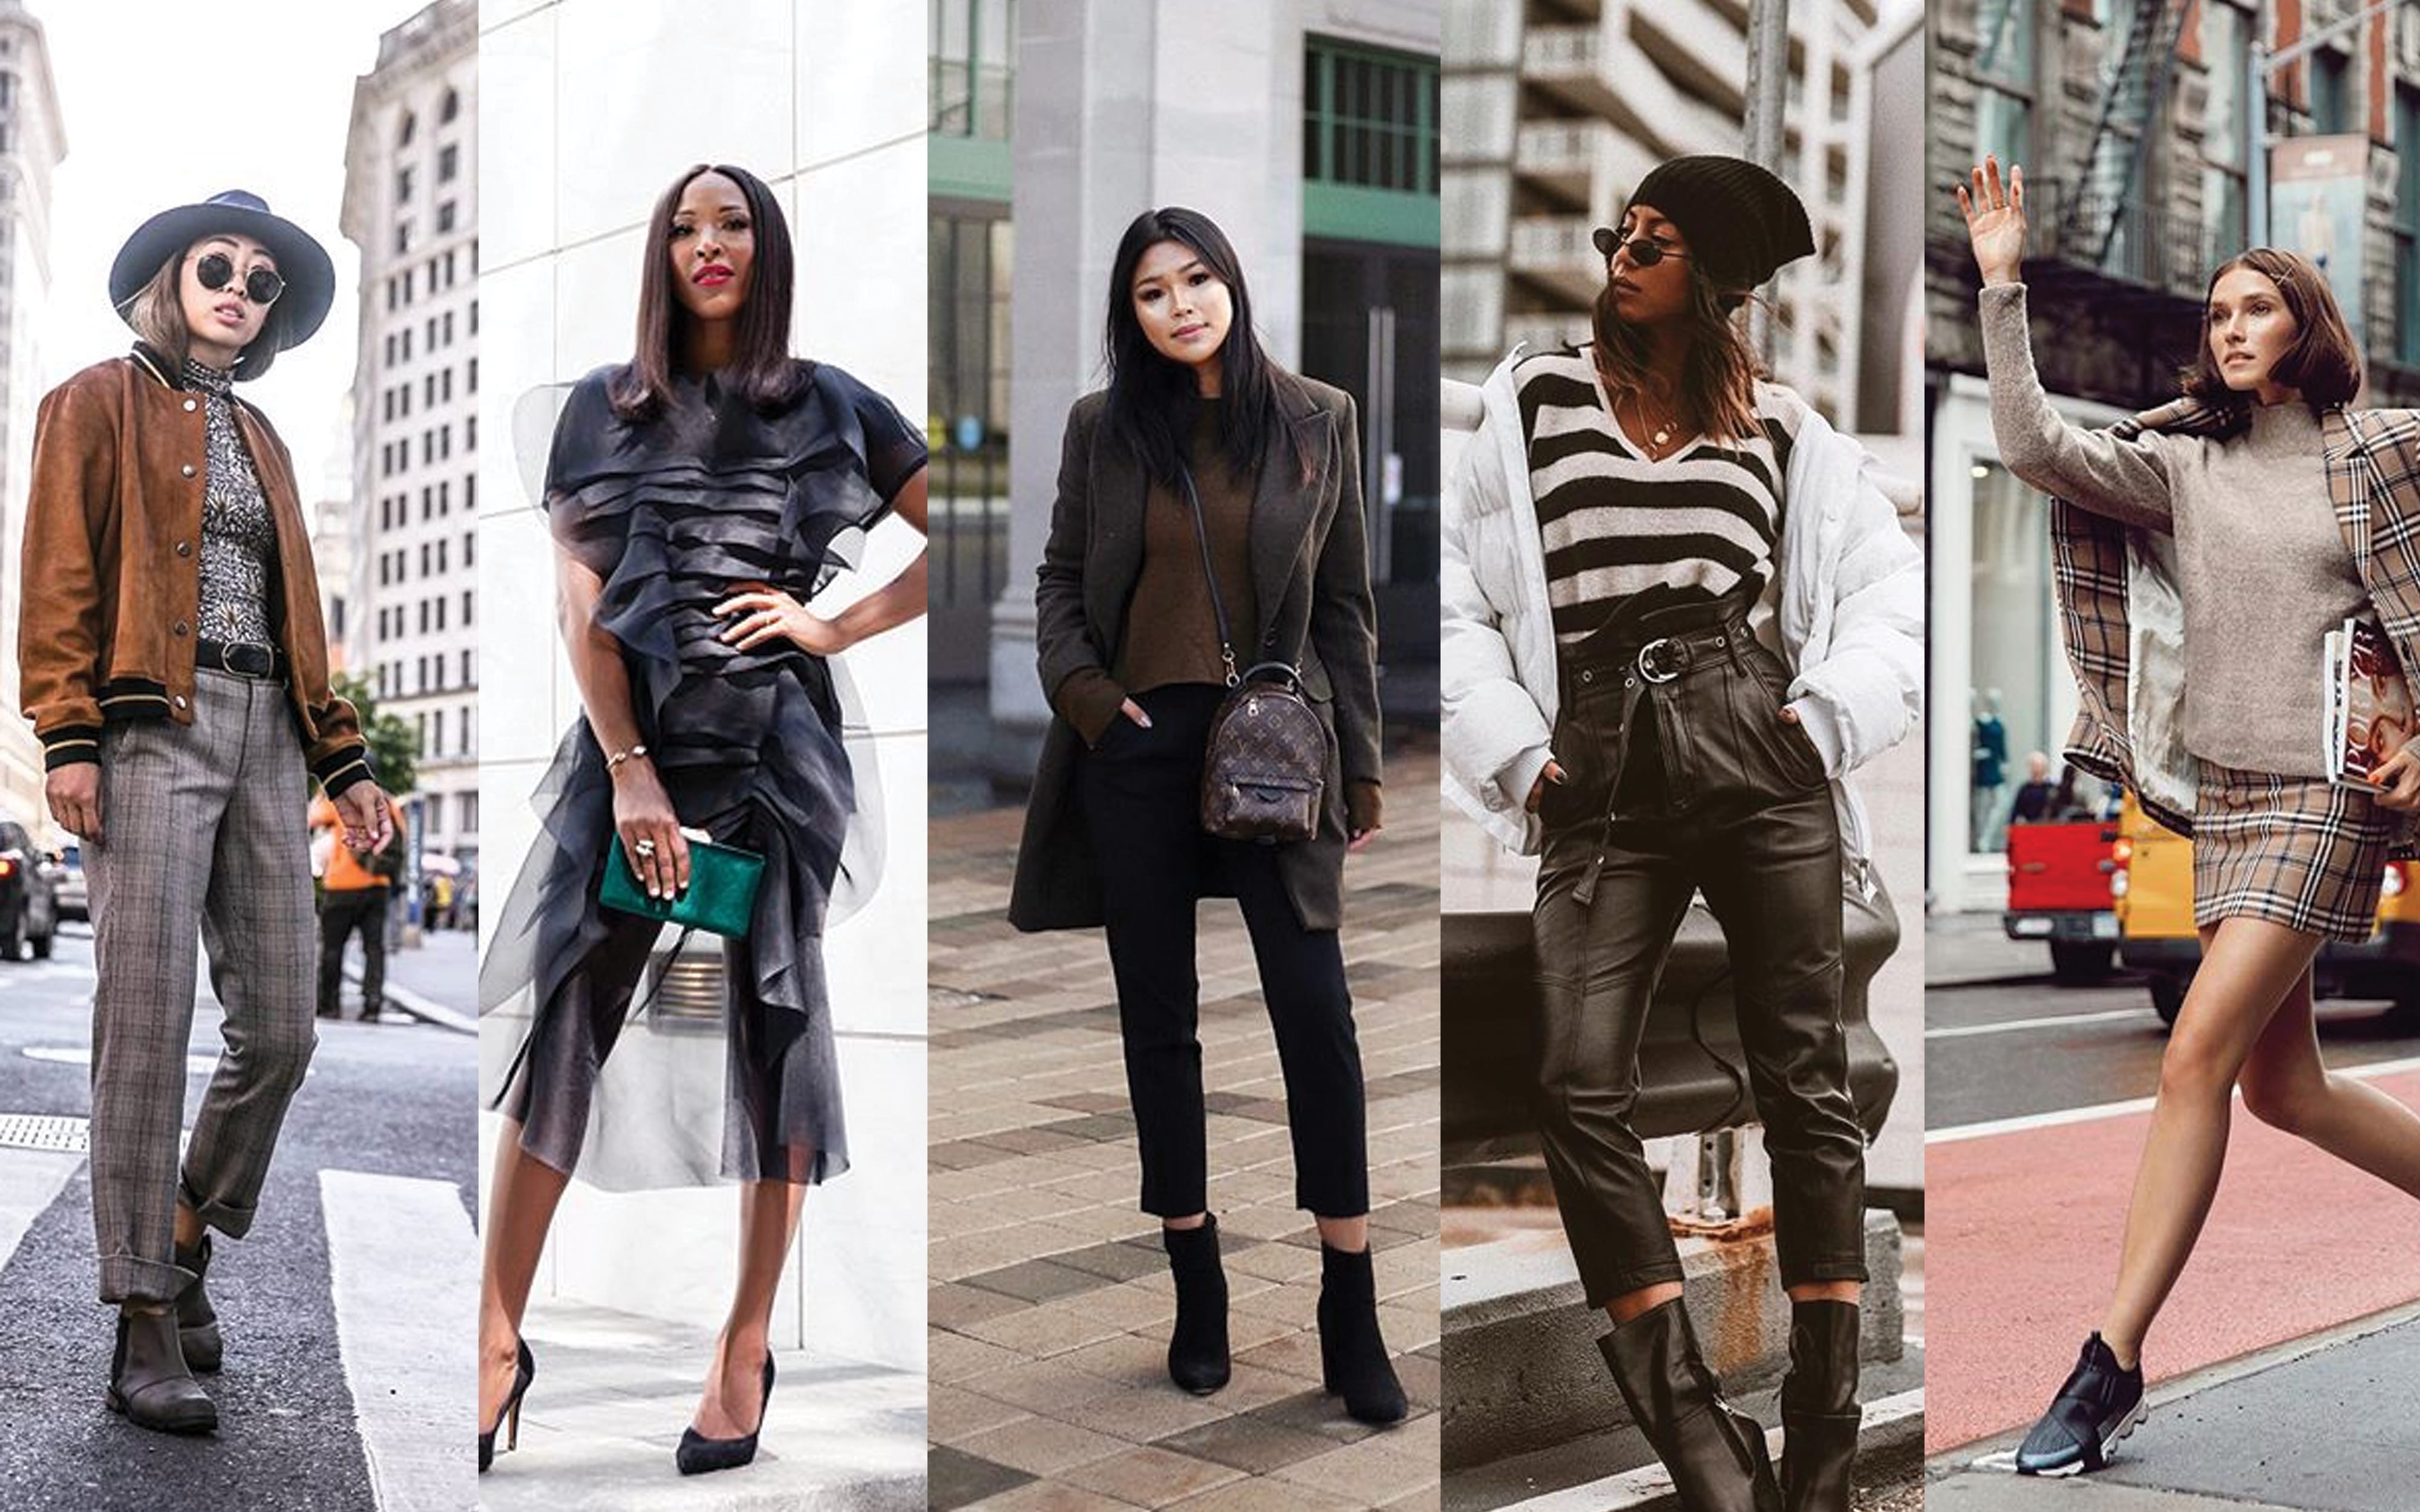 18 Canadian Influencers to Get on Your Feed (If They're Not